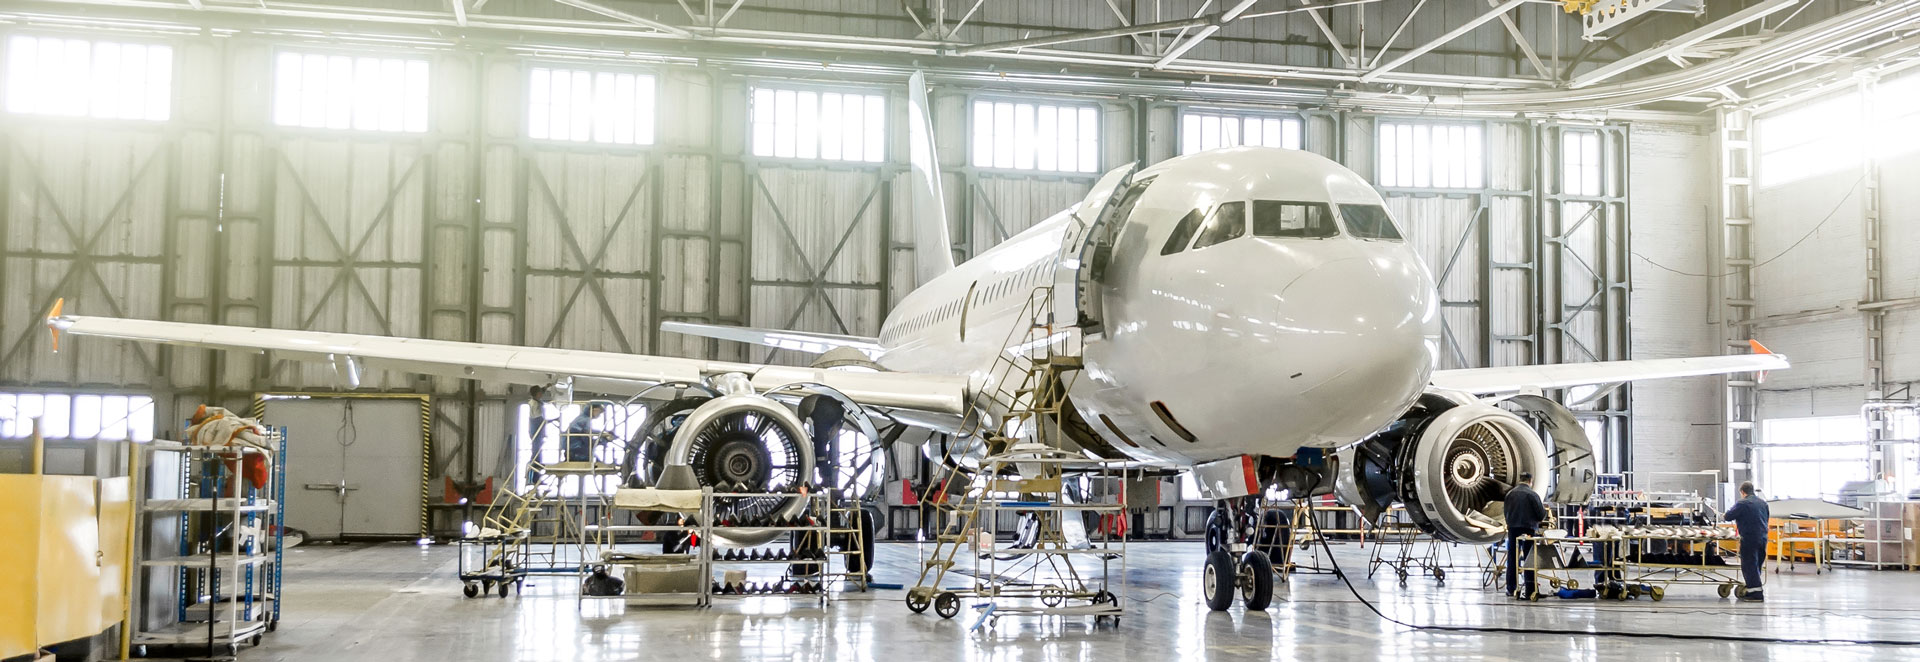 Aviation MRO Market to register 3.7% of CAGR by 2024 Globally